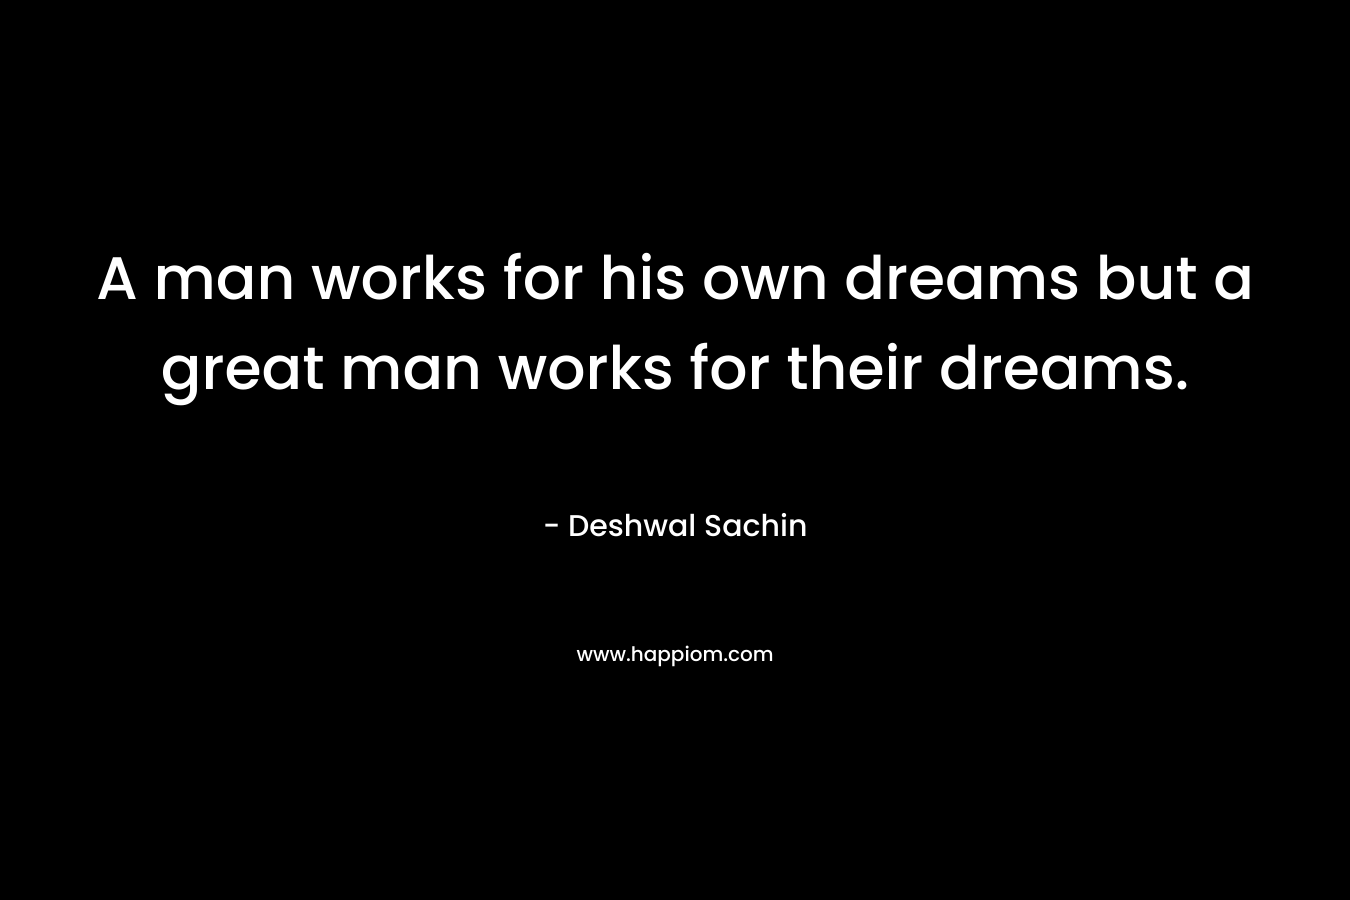 A man works for his own dreams but a great man works for their dreams.